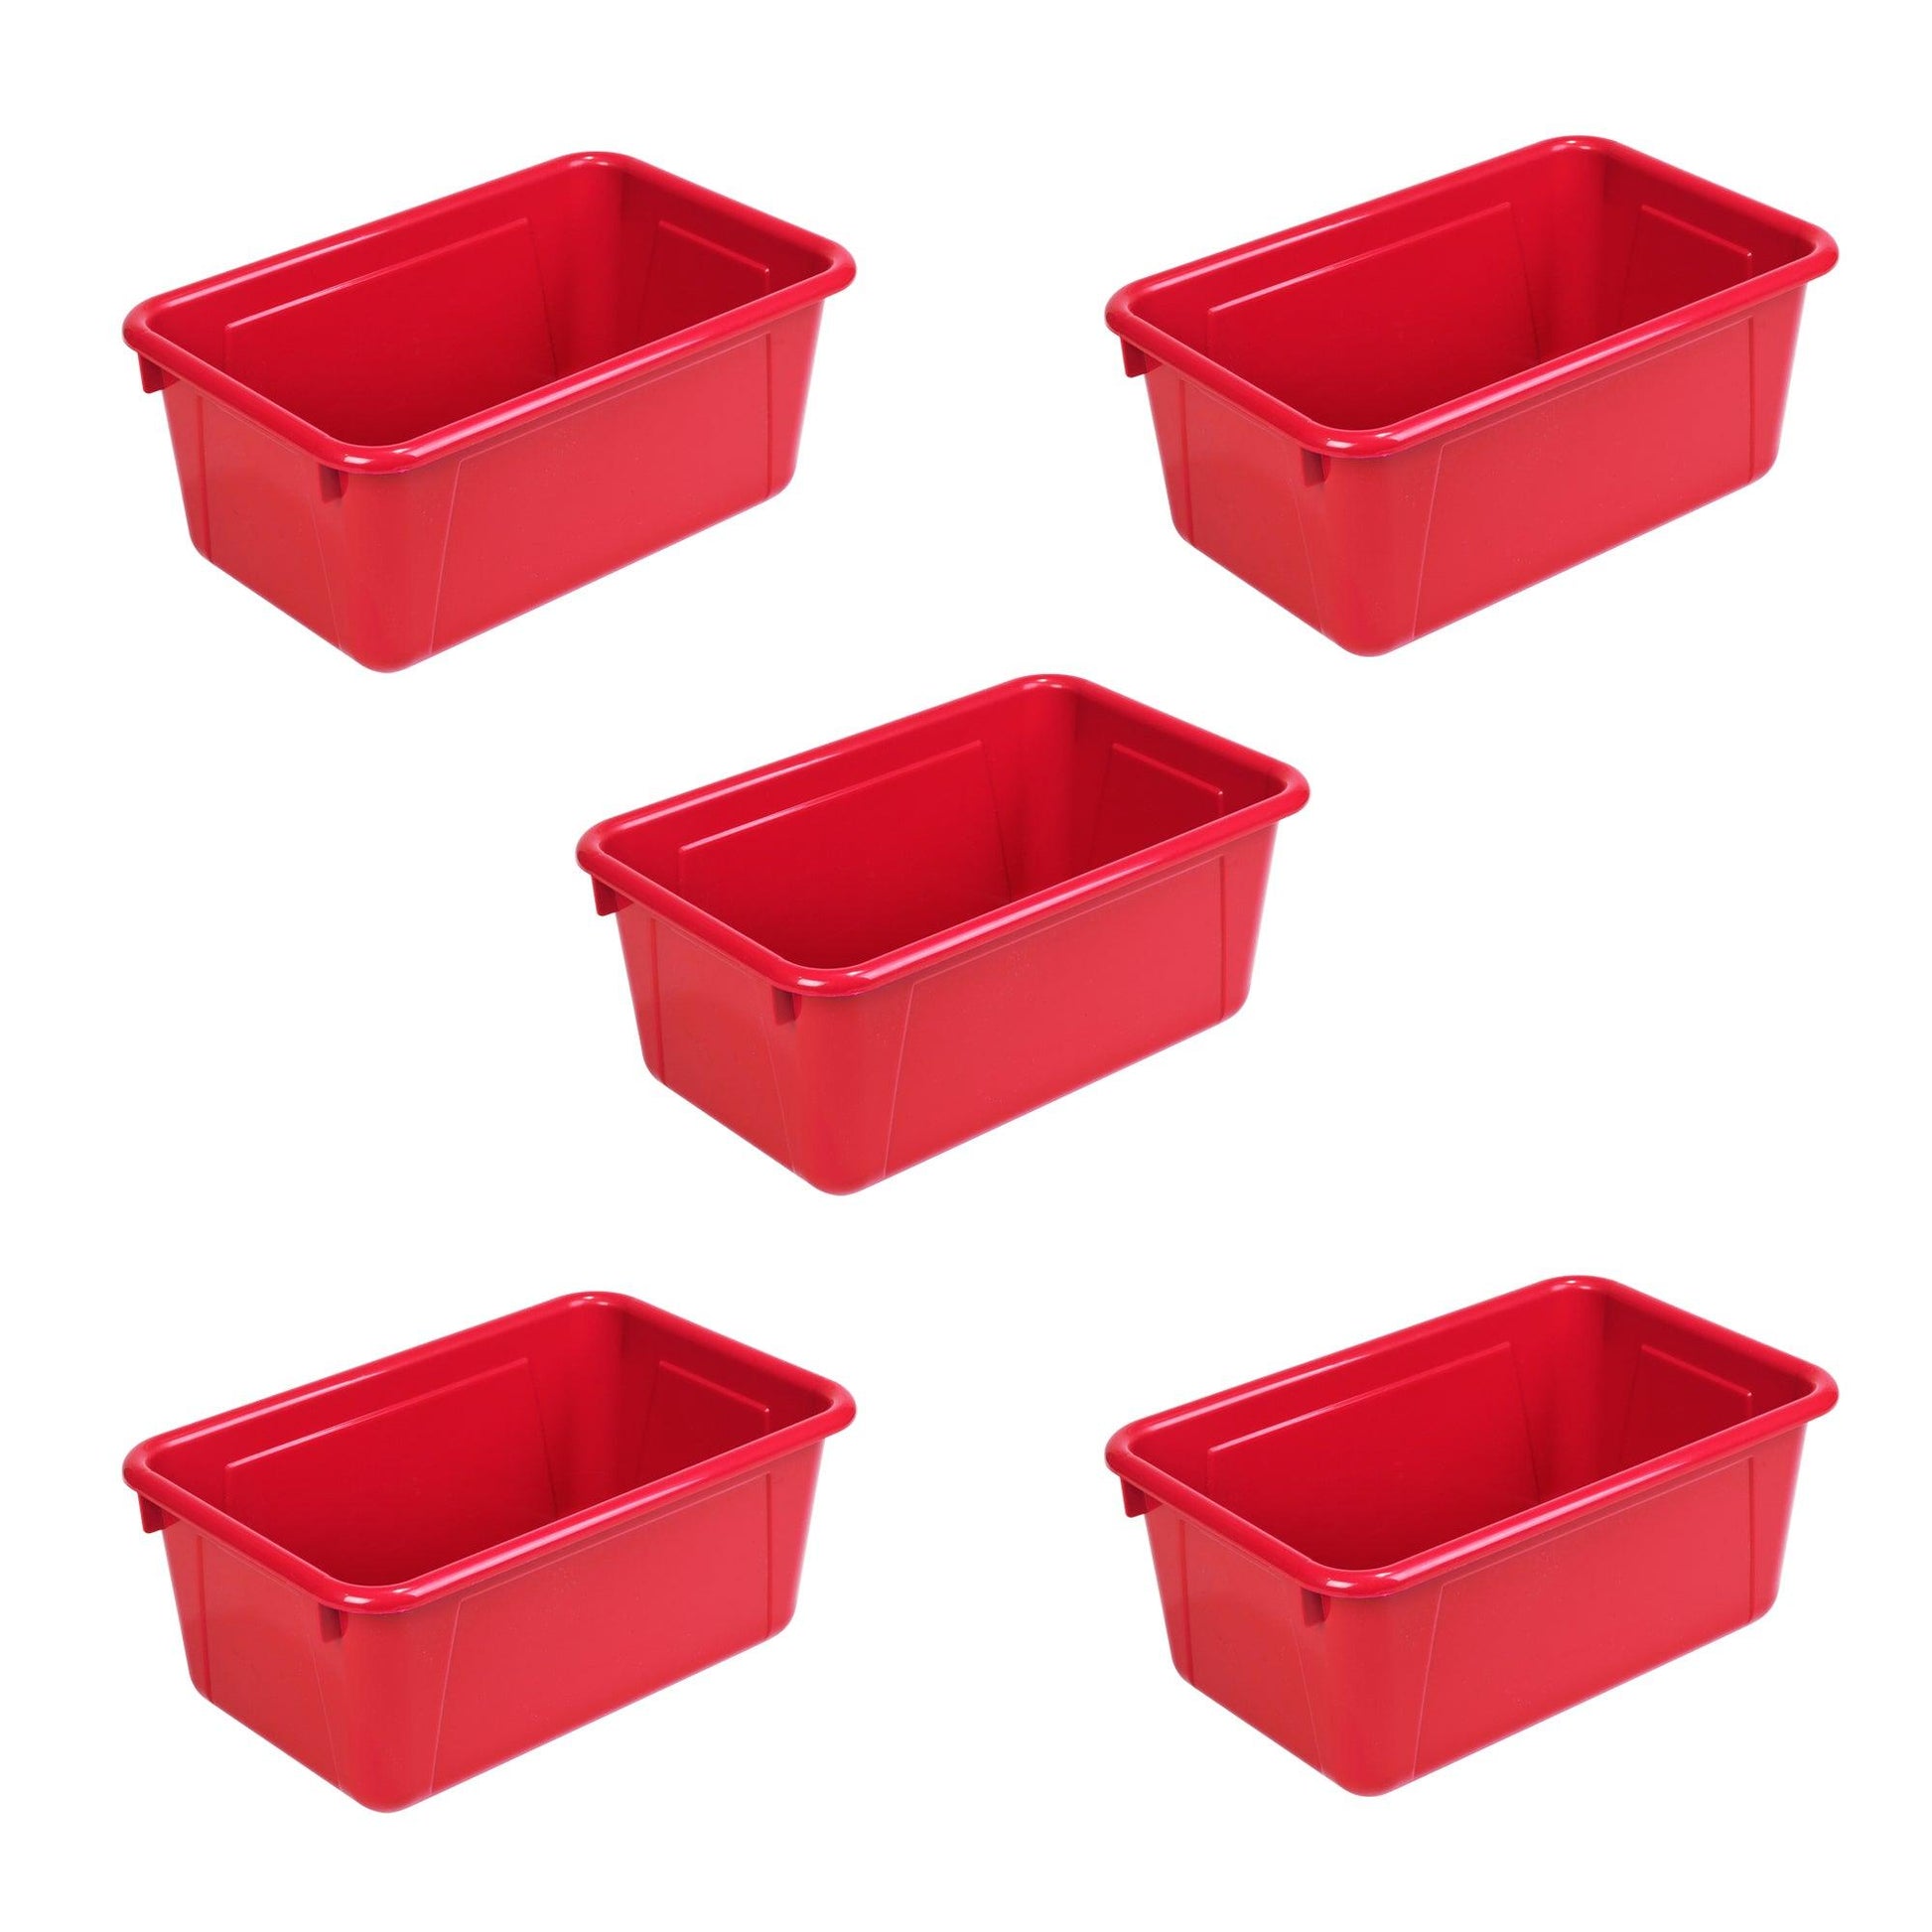 Small Cubby Bin, Red, Pack of 5 - Loomini